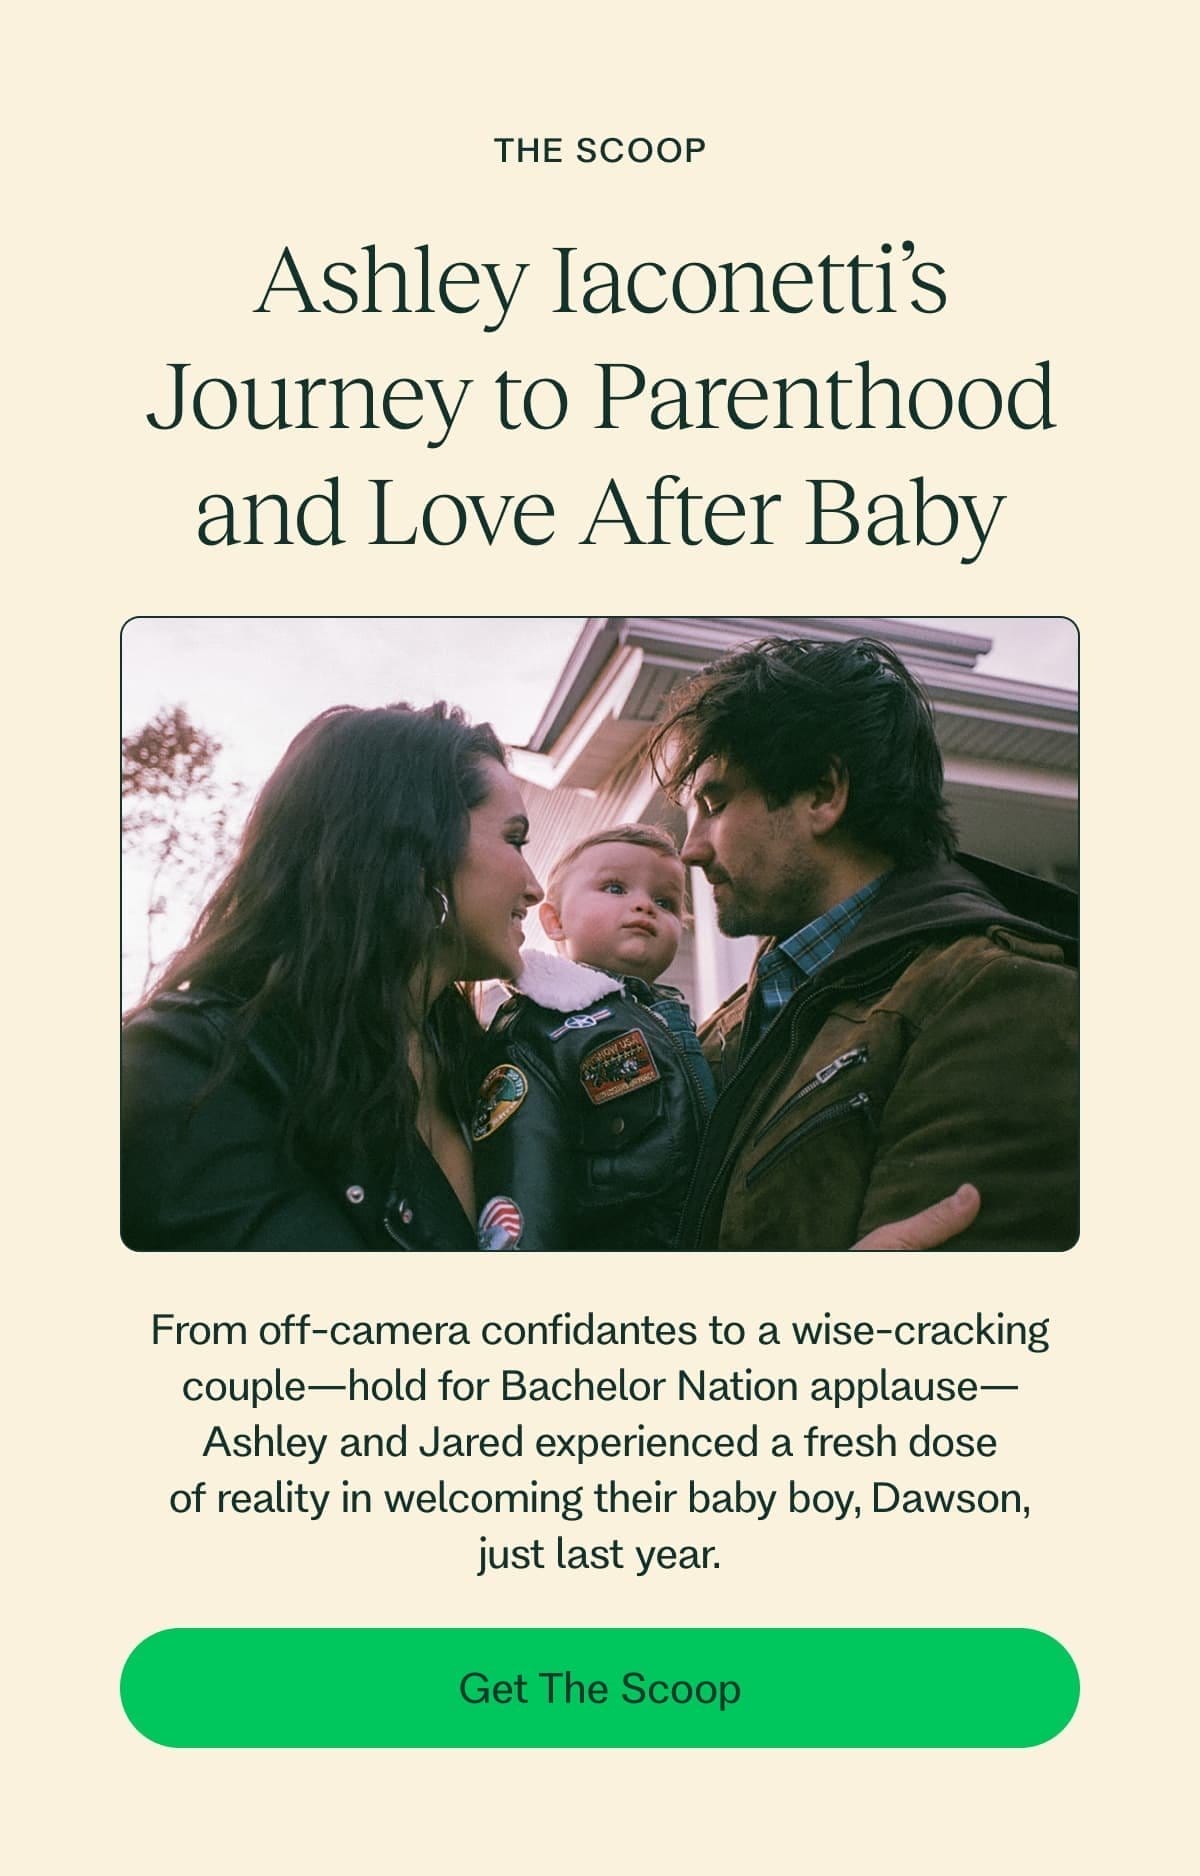 The Scoop Ashley Iaconetti’s Journey to Parenthood and Love After Baby From off-camera confidantes to a wise-cracking couple—hold for Bachelor Nation applause—Ashley and Jared experienced a fresh dose of reality in welcoming their baby boy, Dawson, just last year. Get The Scoop